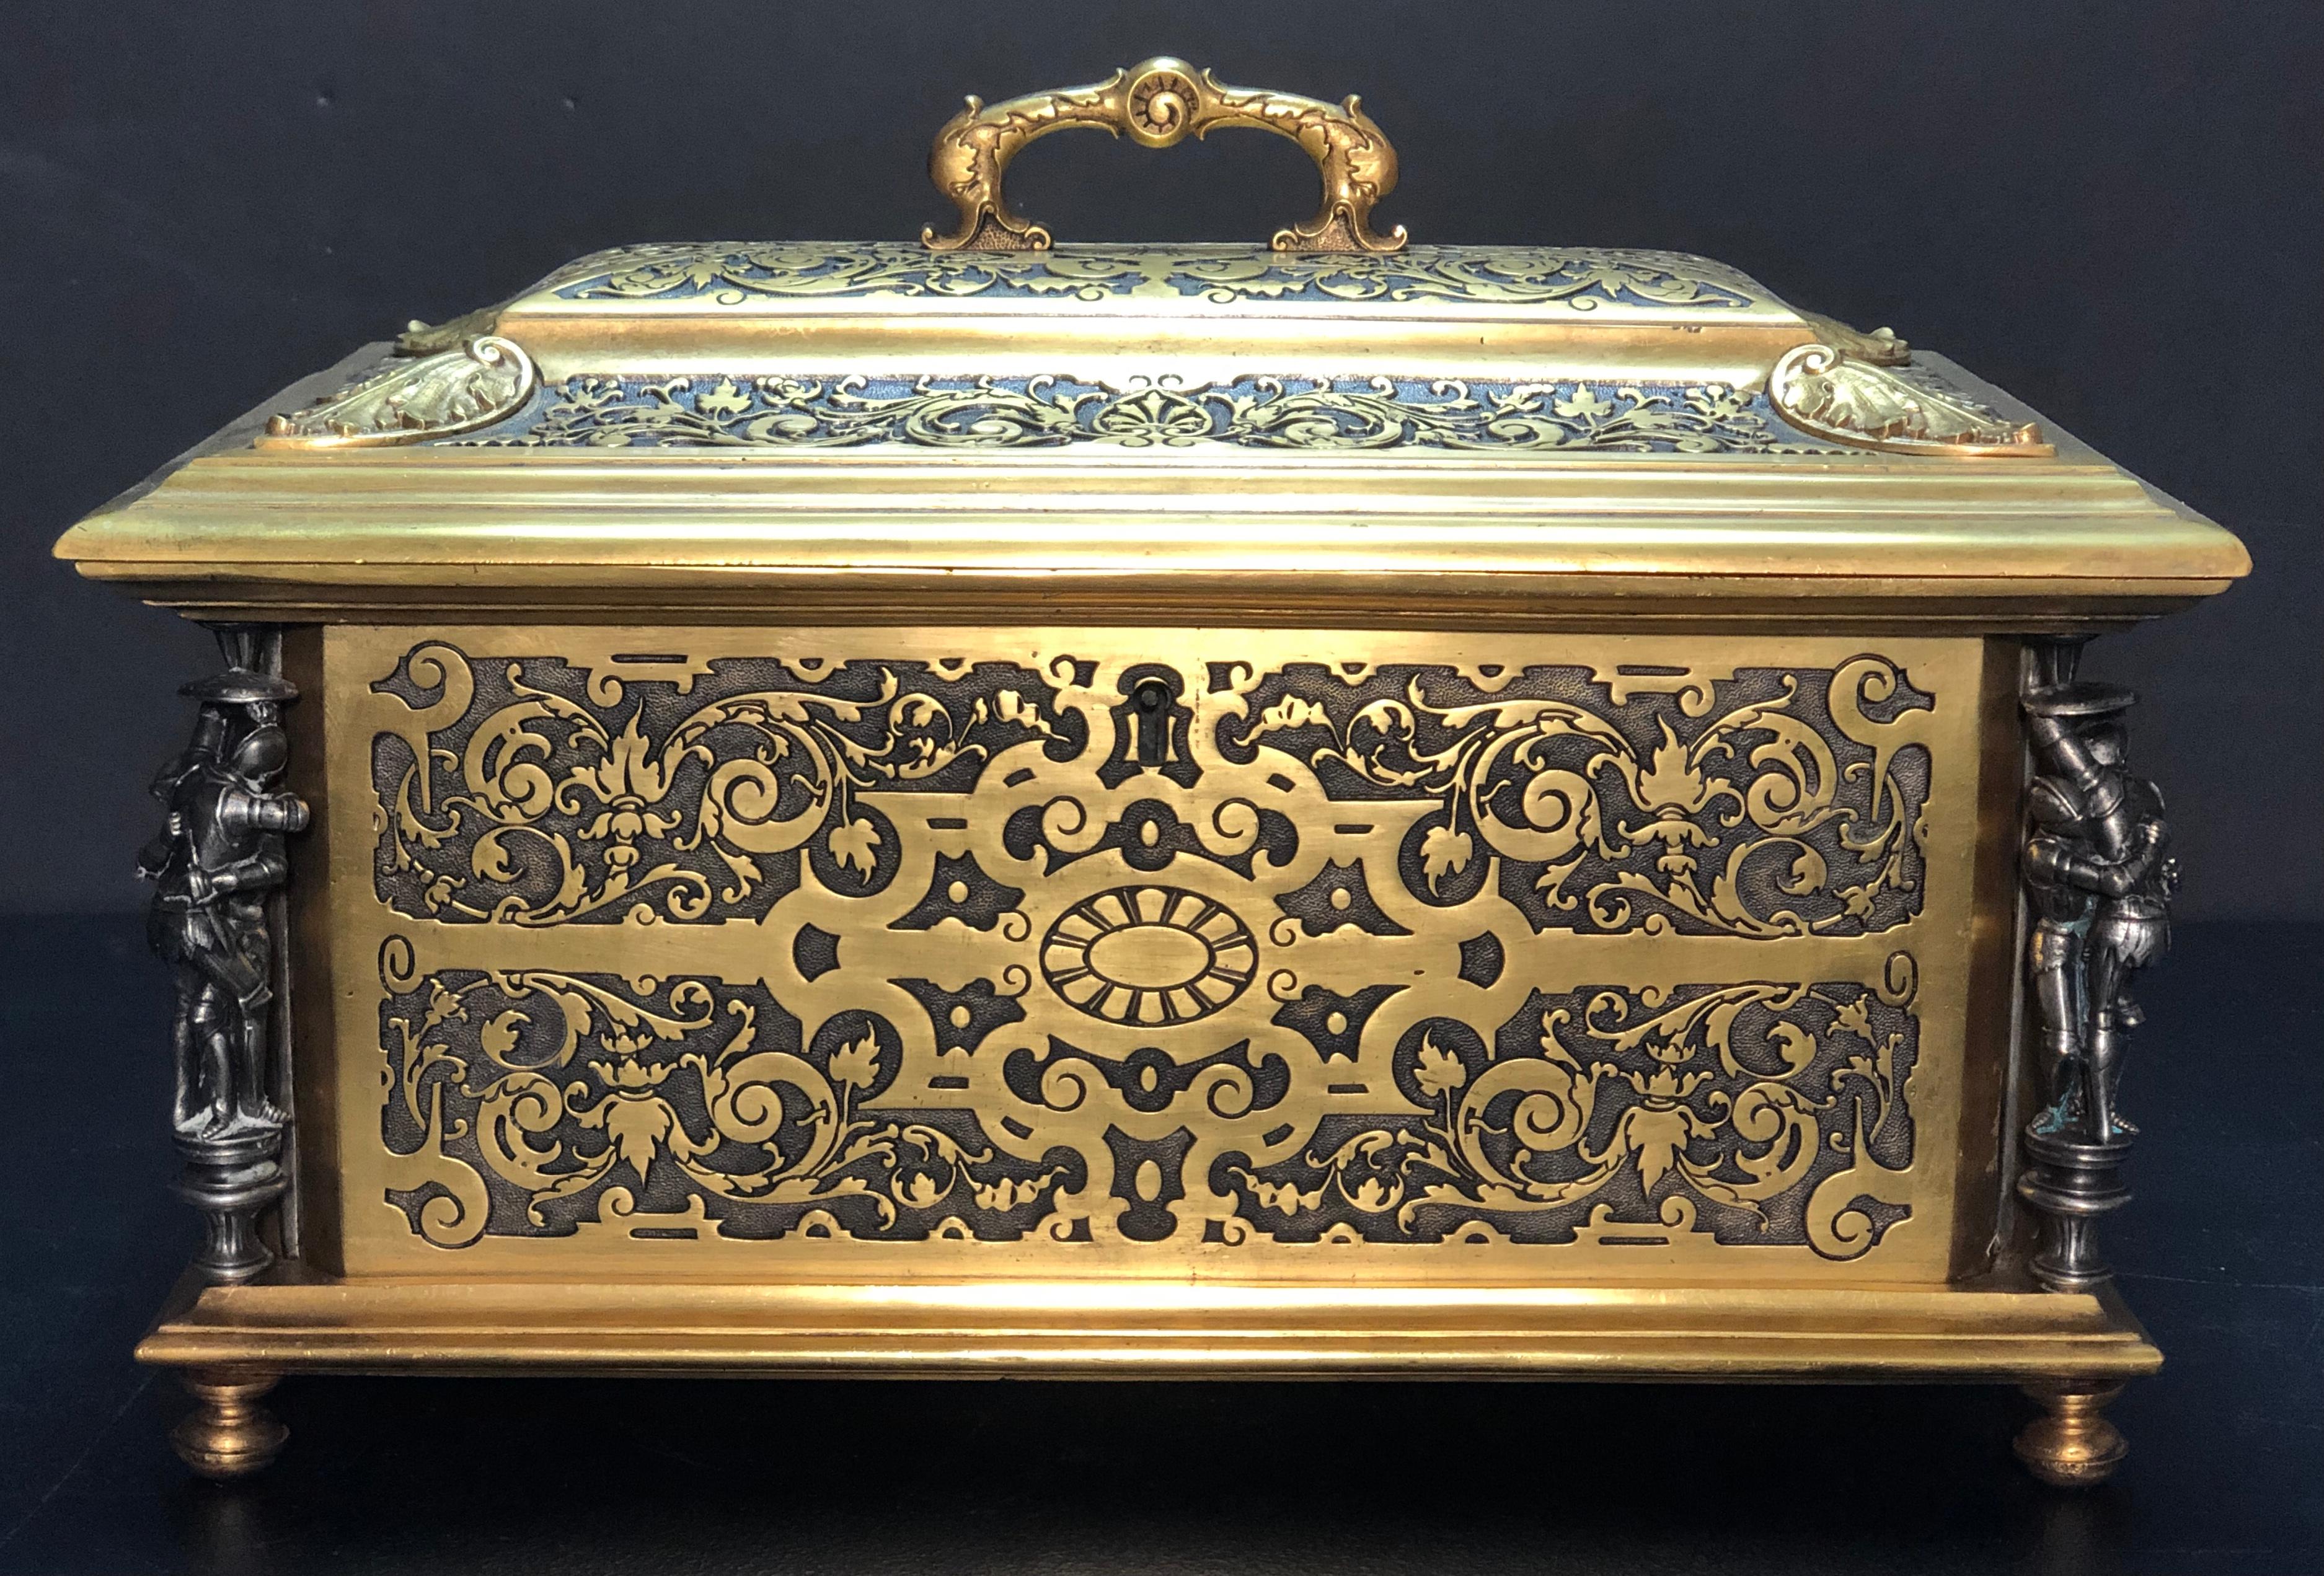 French 19th century large gilt and silvered bronze table box. Finely cast Renaissance Revival gilt and silvered bronze jewelry box with tufted velvet interior lining. Four corners with battling knights in armor. High relief engraved and chased